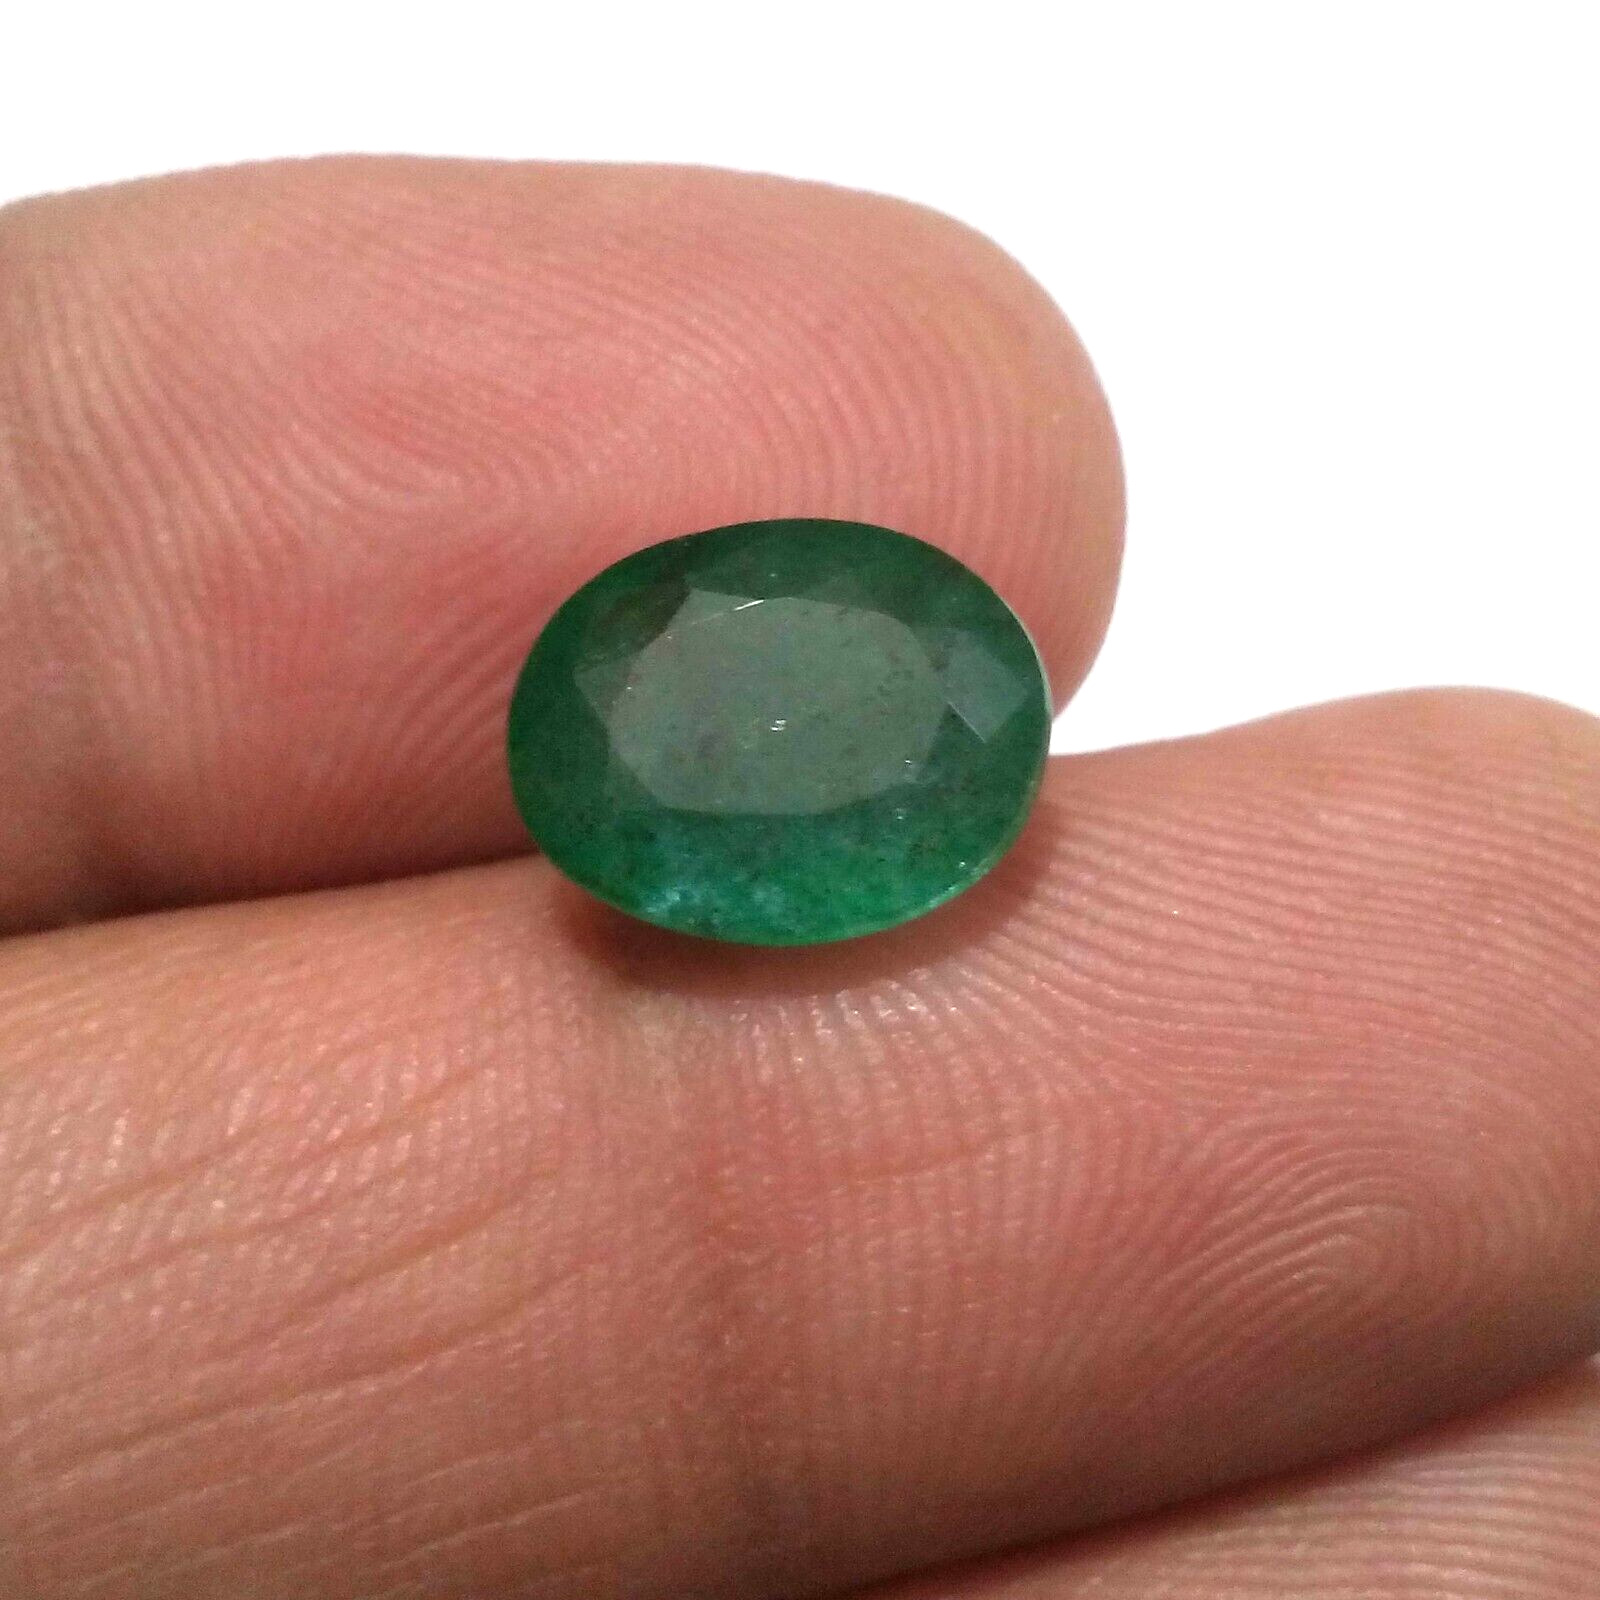 Outstanding Zambian Emerald Faceted Oval Shape 4.60 Crt Top Green Loose Gemstone